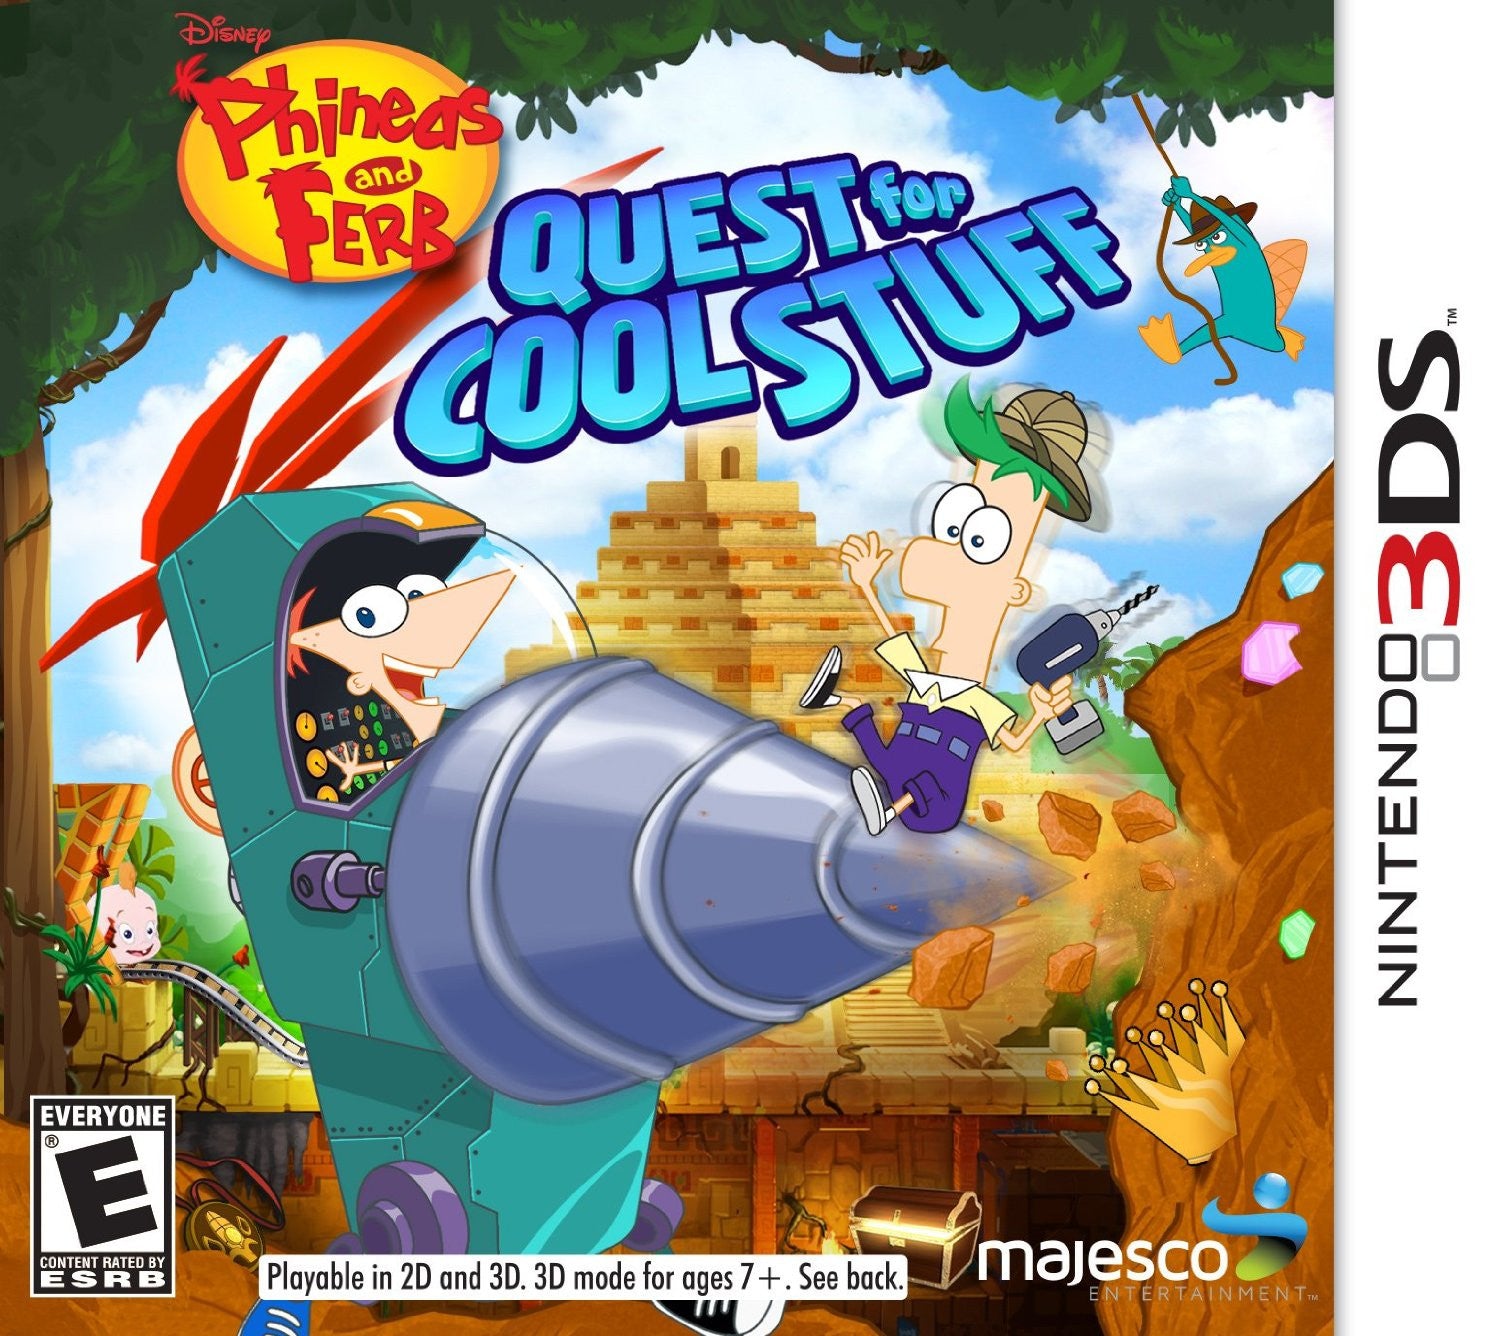 Phineas and Ferb: Quest for Cool Stuff - Nintendo 3DS